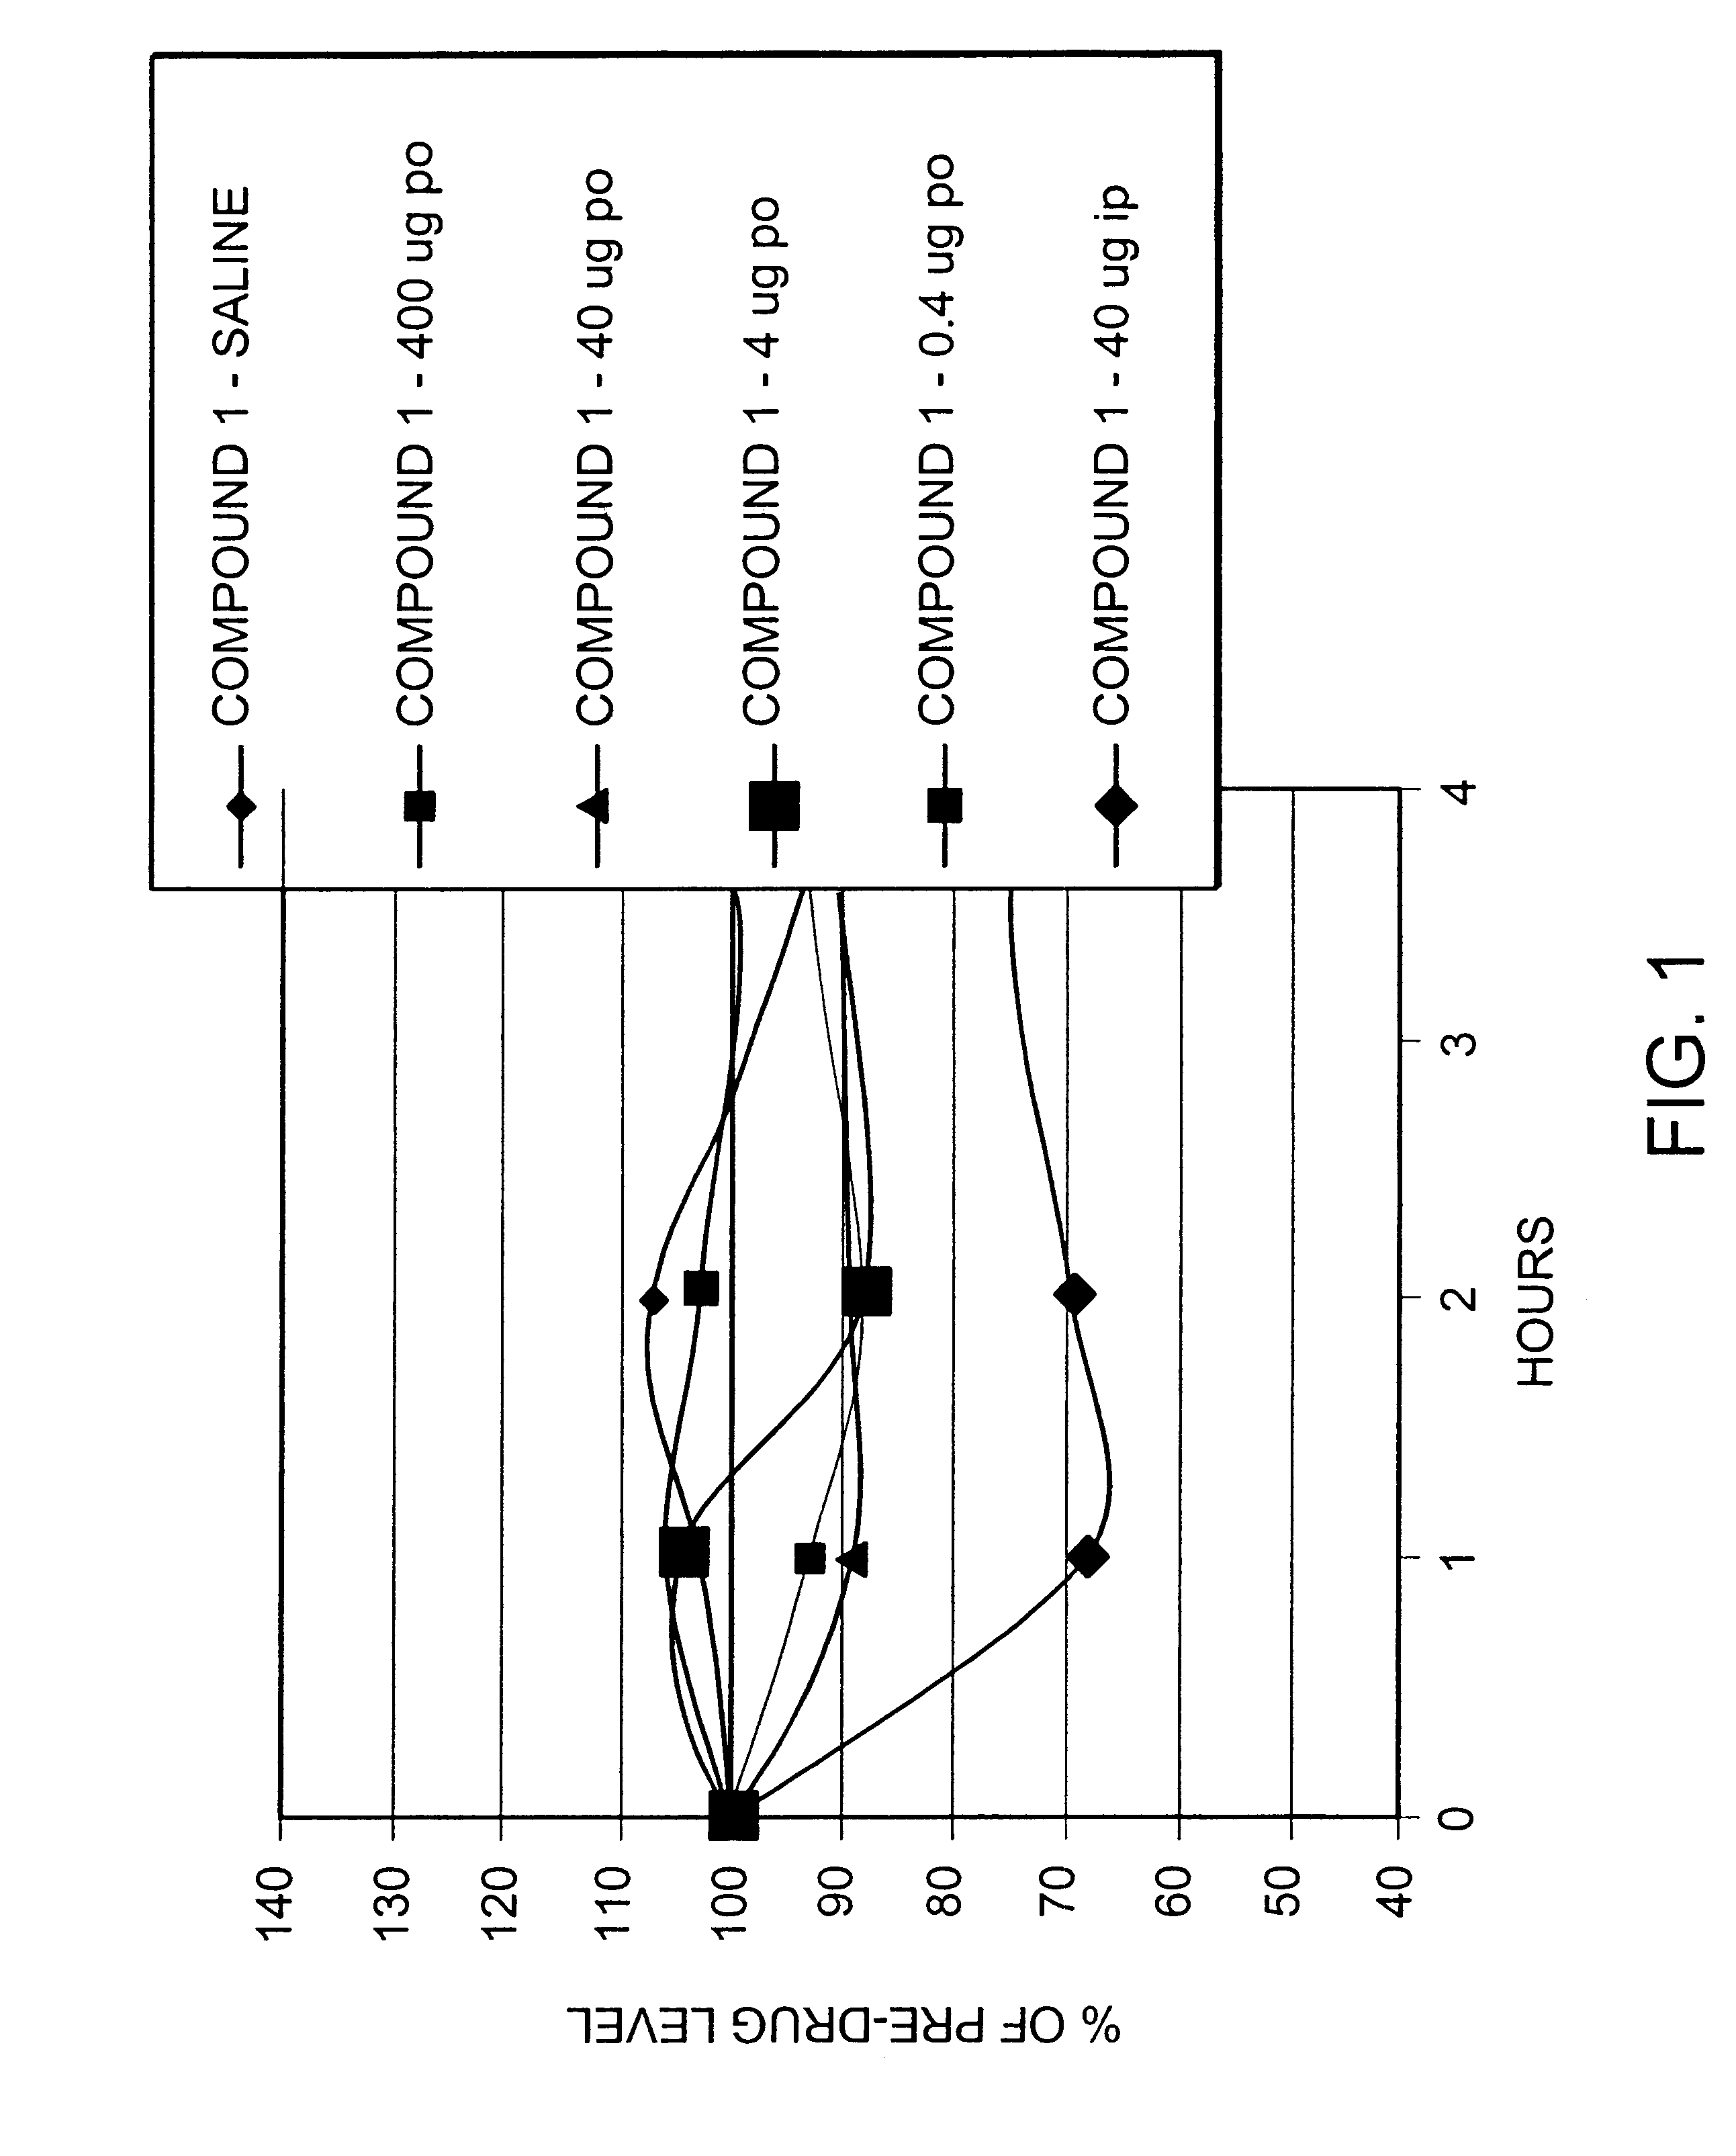 Peptide agonists of GLP-1 activity